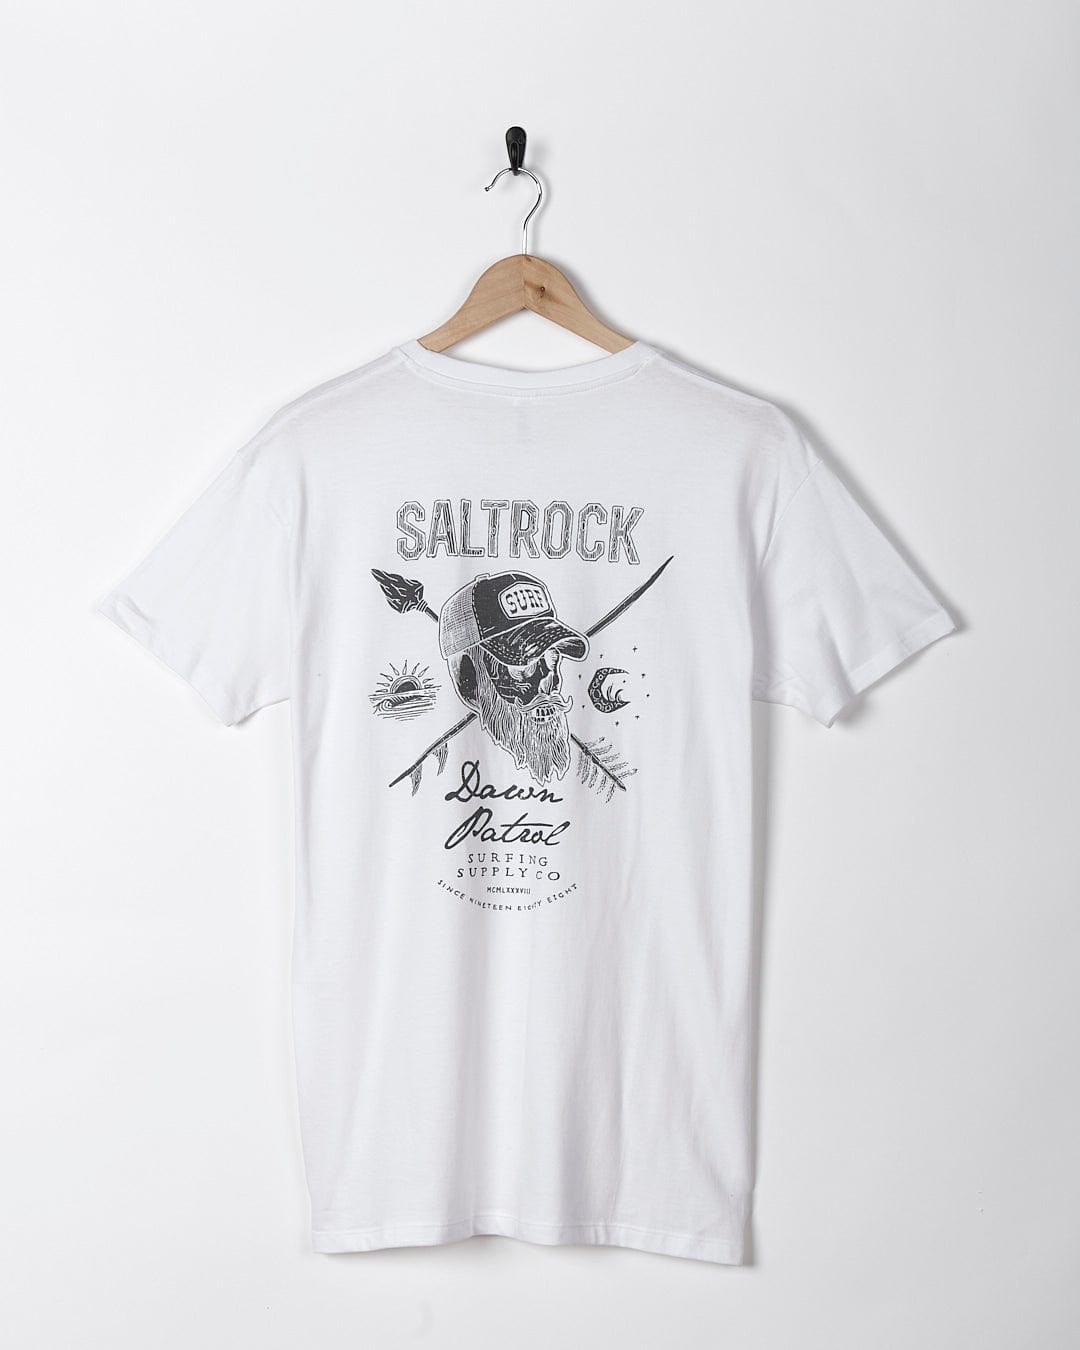 A Dawn Patrol - Mens Short Sleeve T-Shirt - White with the brand name Saltrock on it.